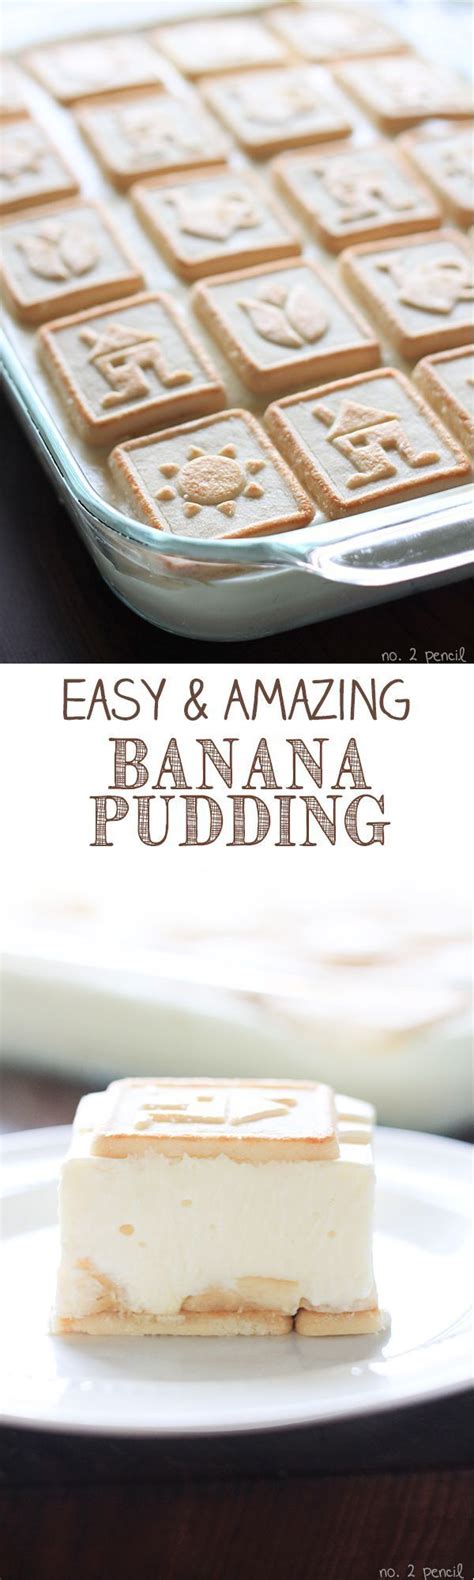 Banana pudding recipe with chessman cookies. Paula Deen Banana Pudding | Recipe | Easy banana pudding ...